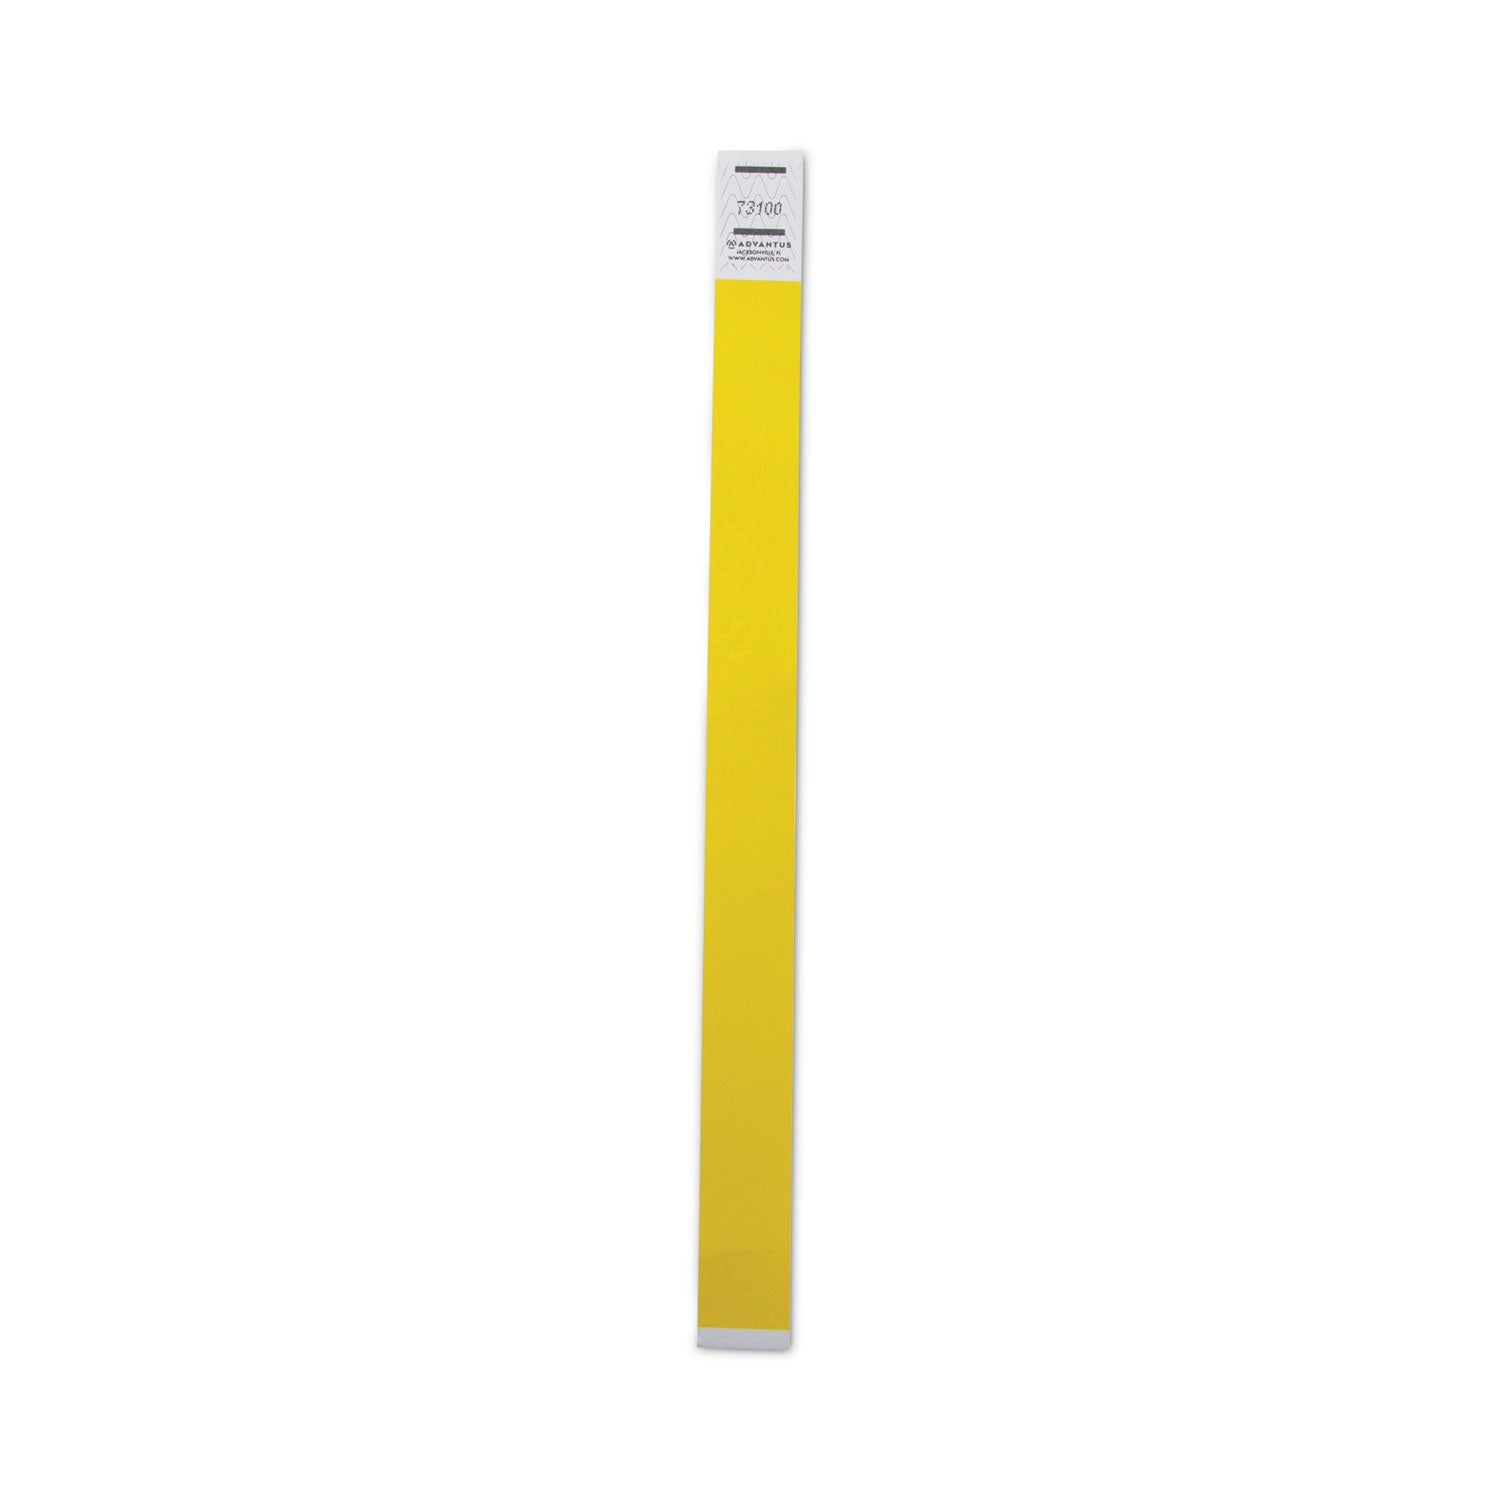 crowd-management-wristbands-sequentially-numbered-975-x-075-neon-yellow500-pack_avt91123 - 5